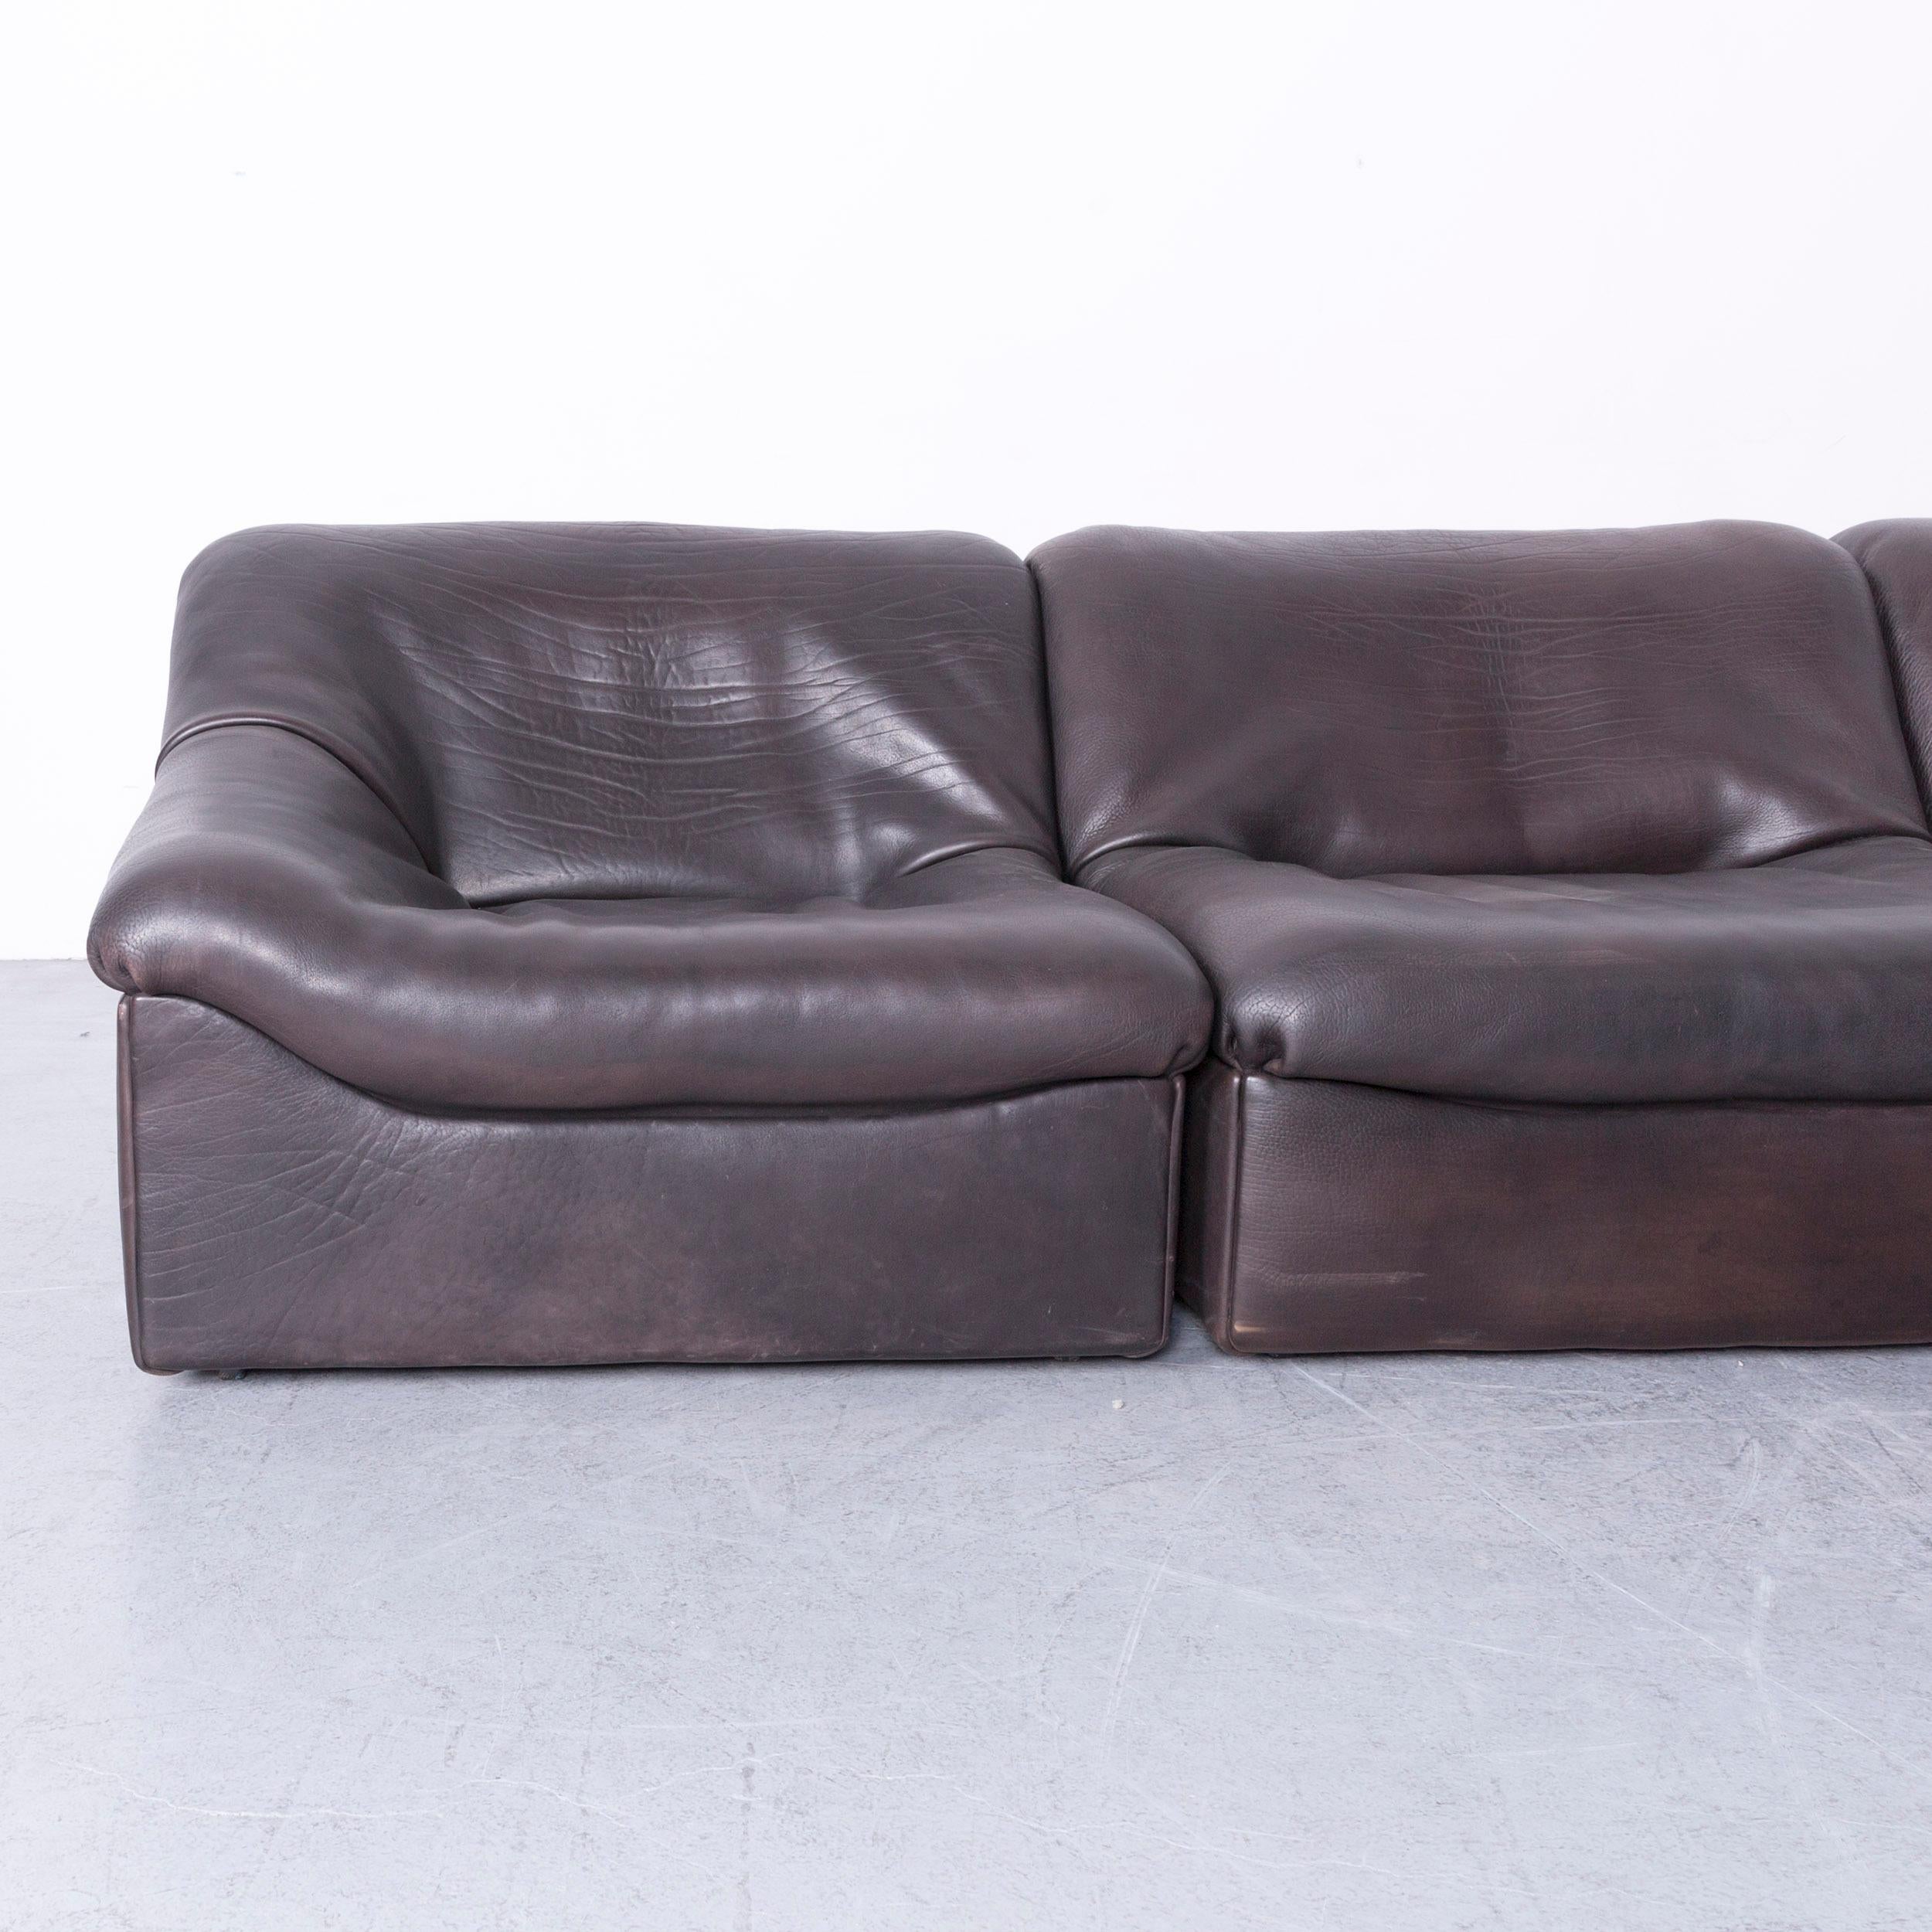 We bring to you a De Sede DS 46 Designer Leather Corner Sofa Brown Modular Function Couch 